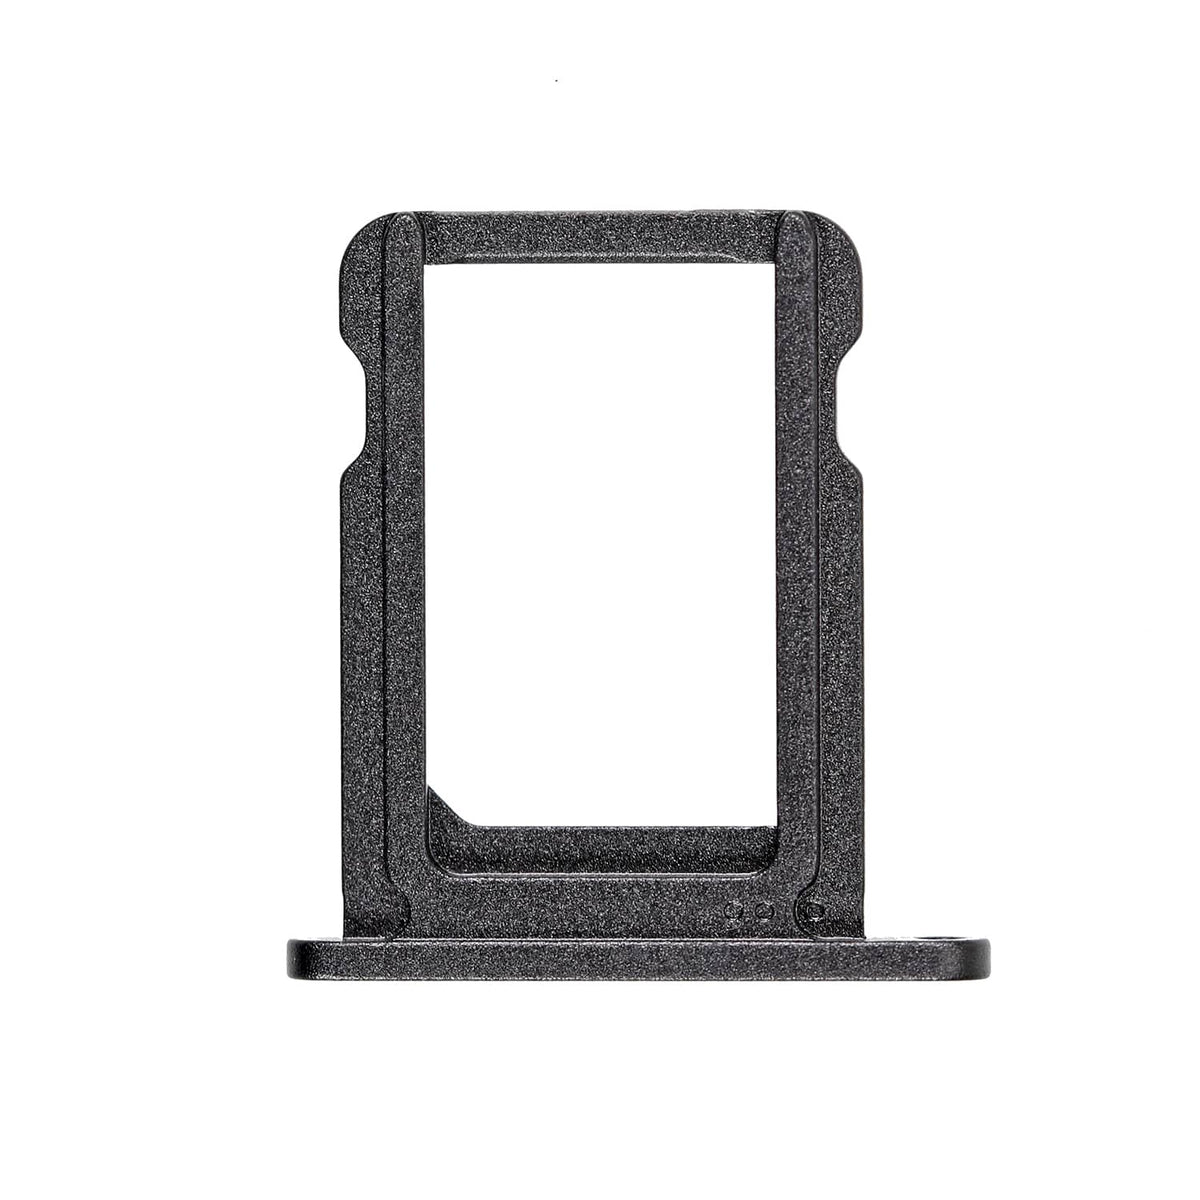 SIM CARD TRAY FOR IPAD PRO 11 3RD - SPACE GRAY